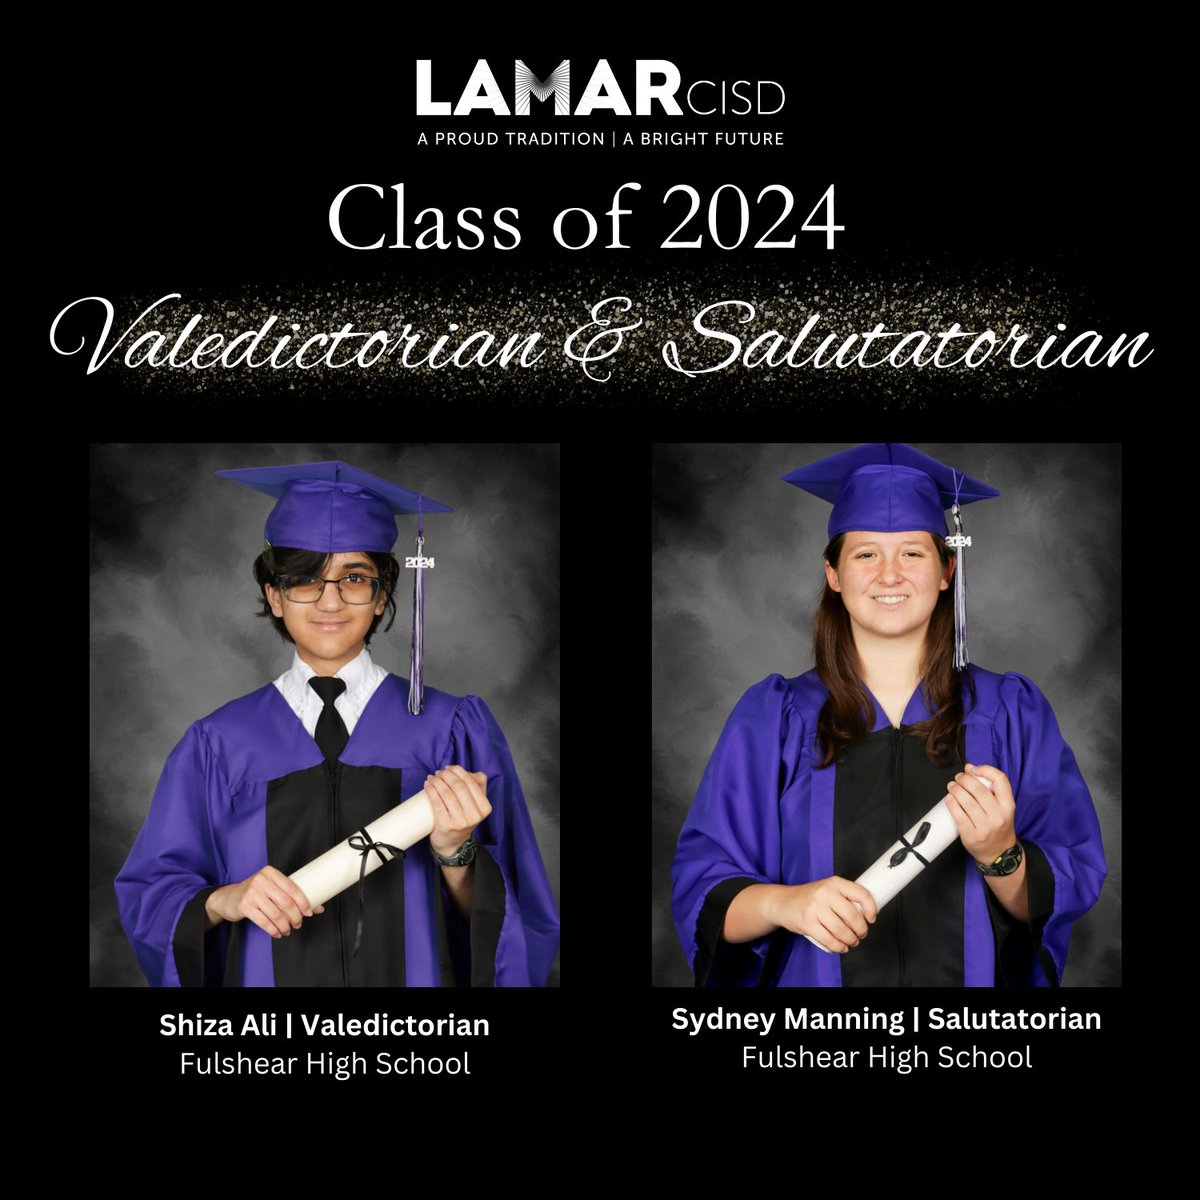 Introducing the Fulshear High School Class of 2024 Valedictorian & Salutatorian.🎉 Valedictorian Shiza Ali plans to attend the University of Texas in the fall and study mechanical engineering. Salutatorian Sydney Manning plans to study chemical engineering.